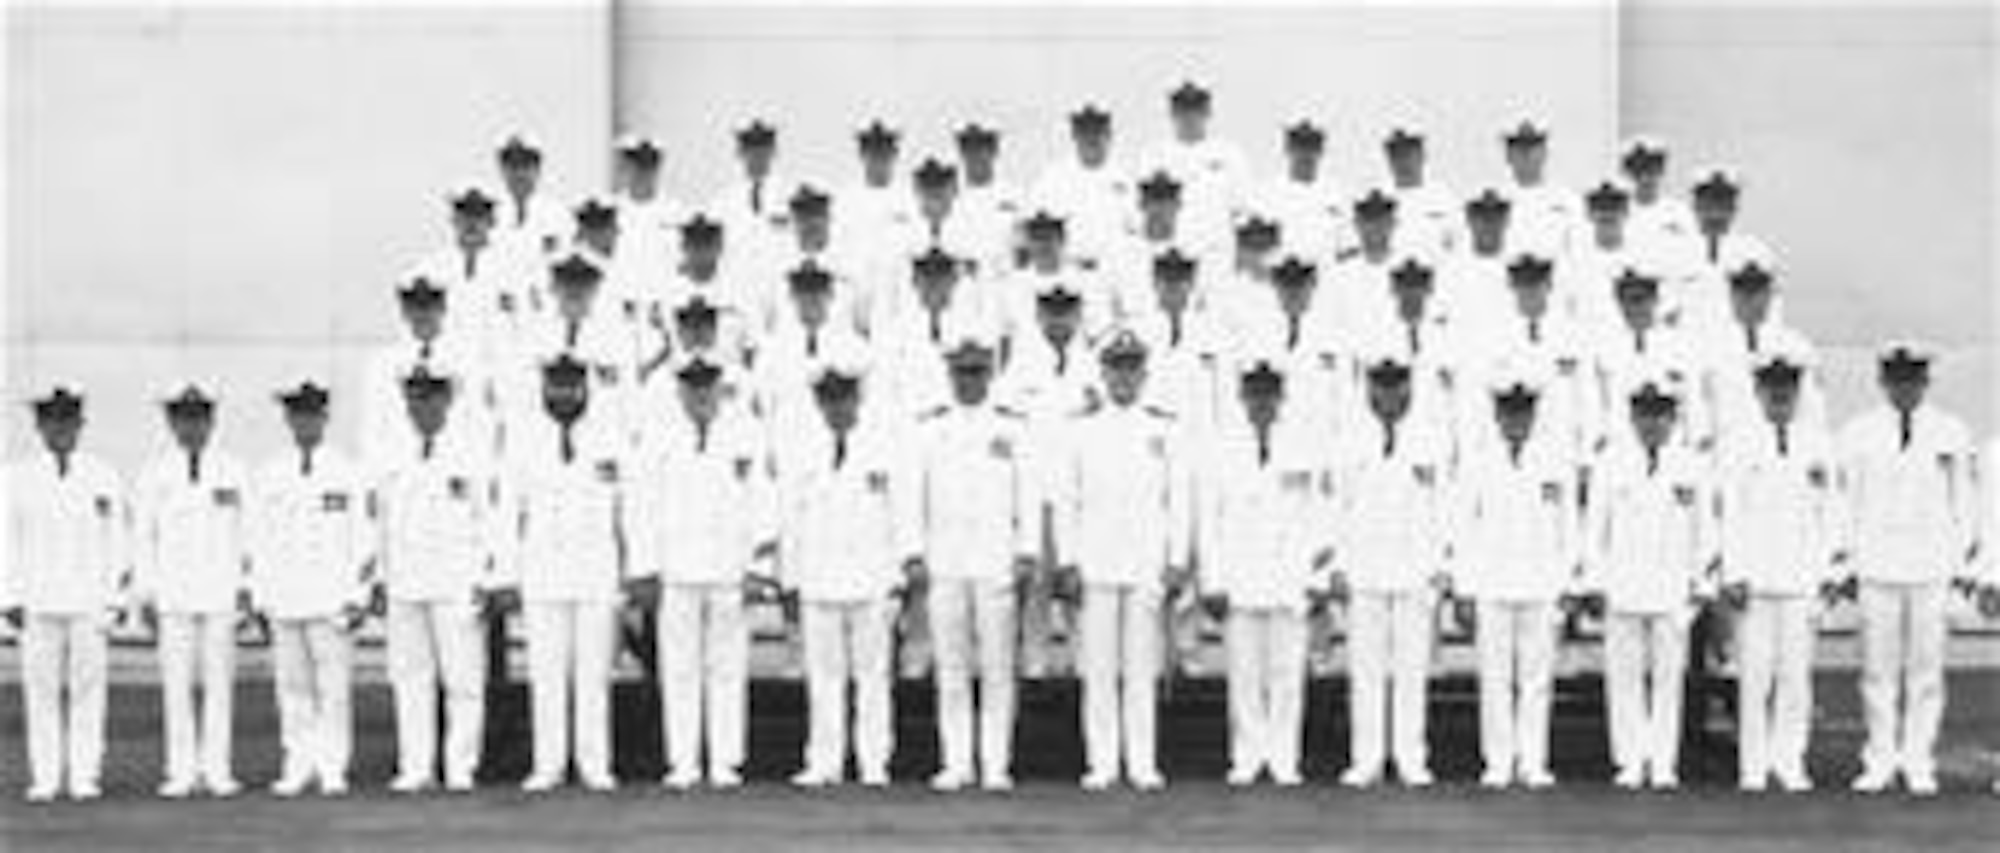 Misawa Naval Security Group in the 1970s